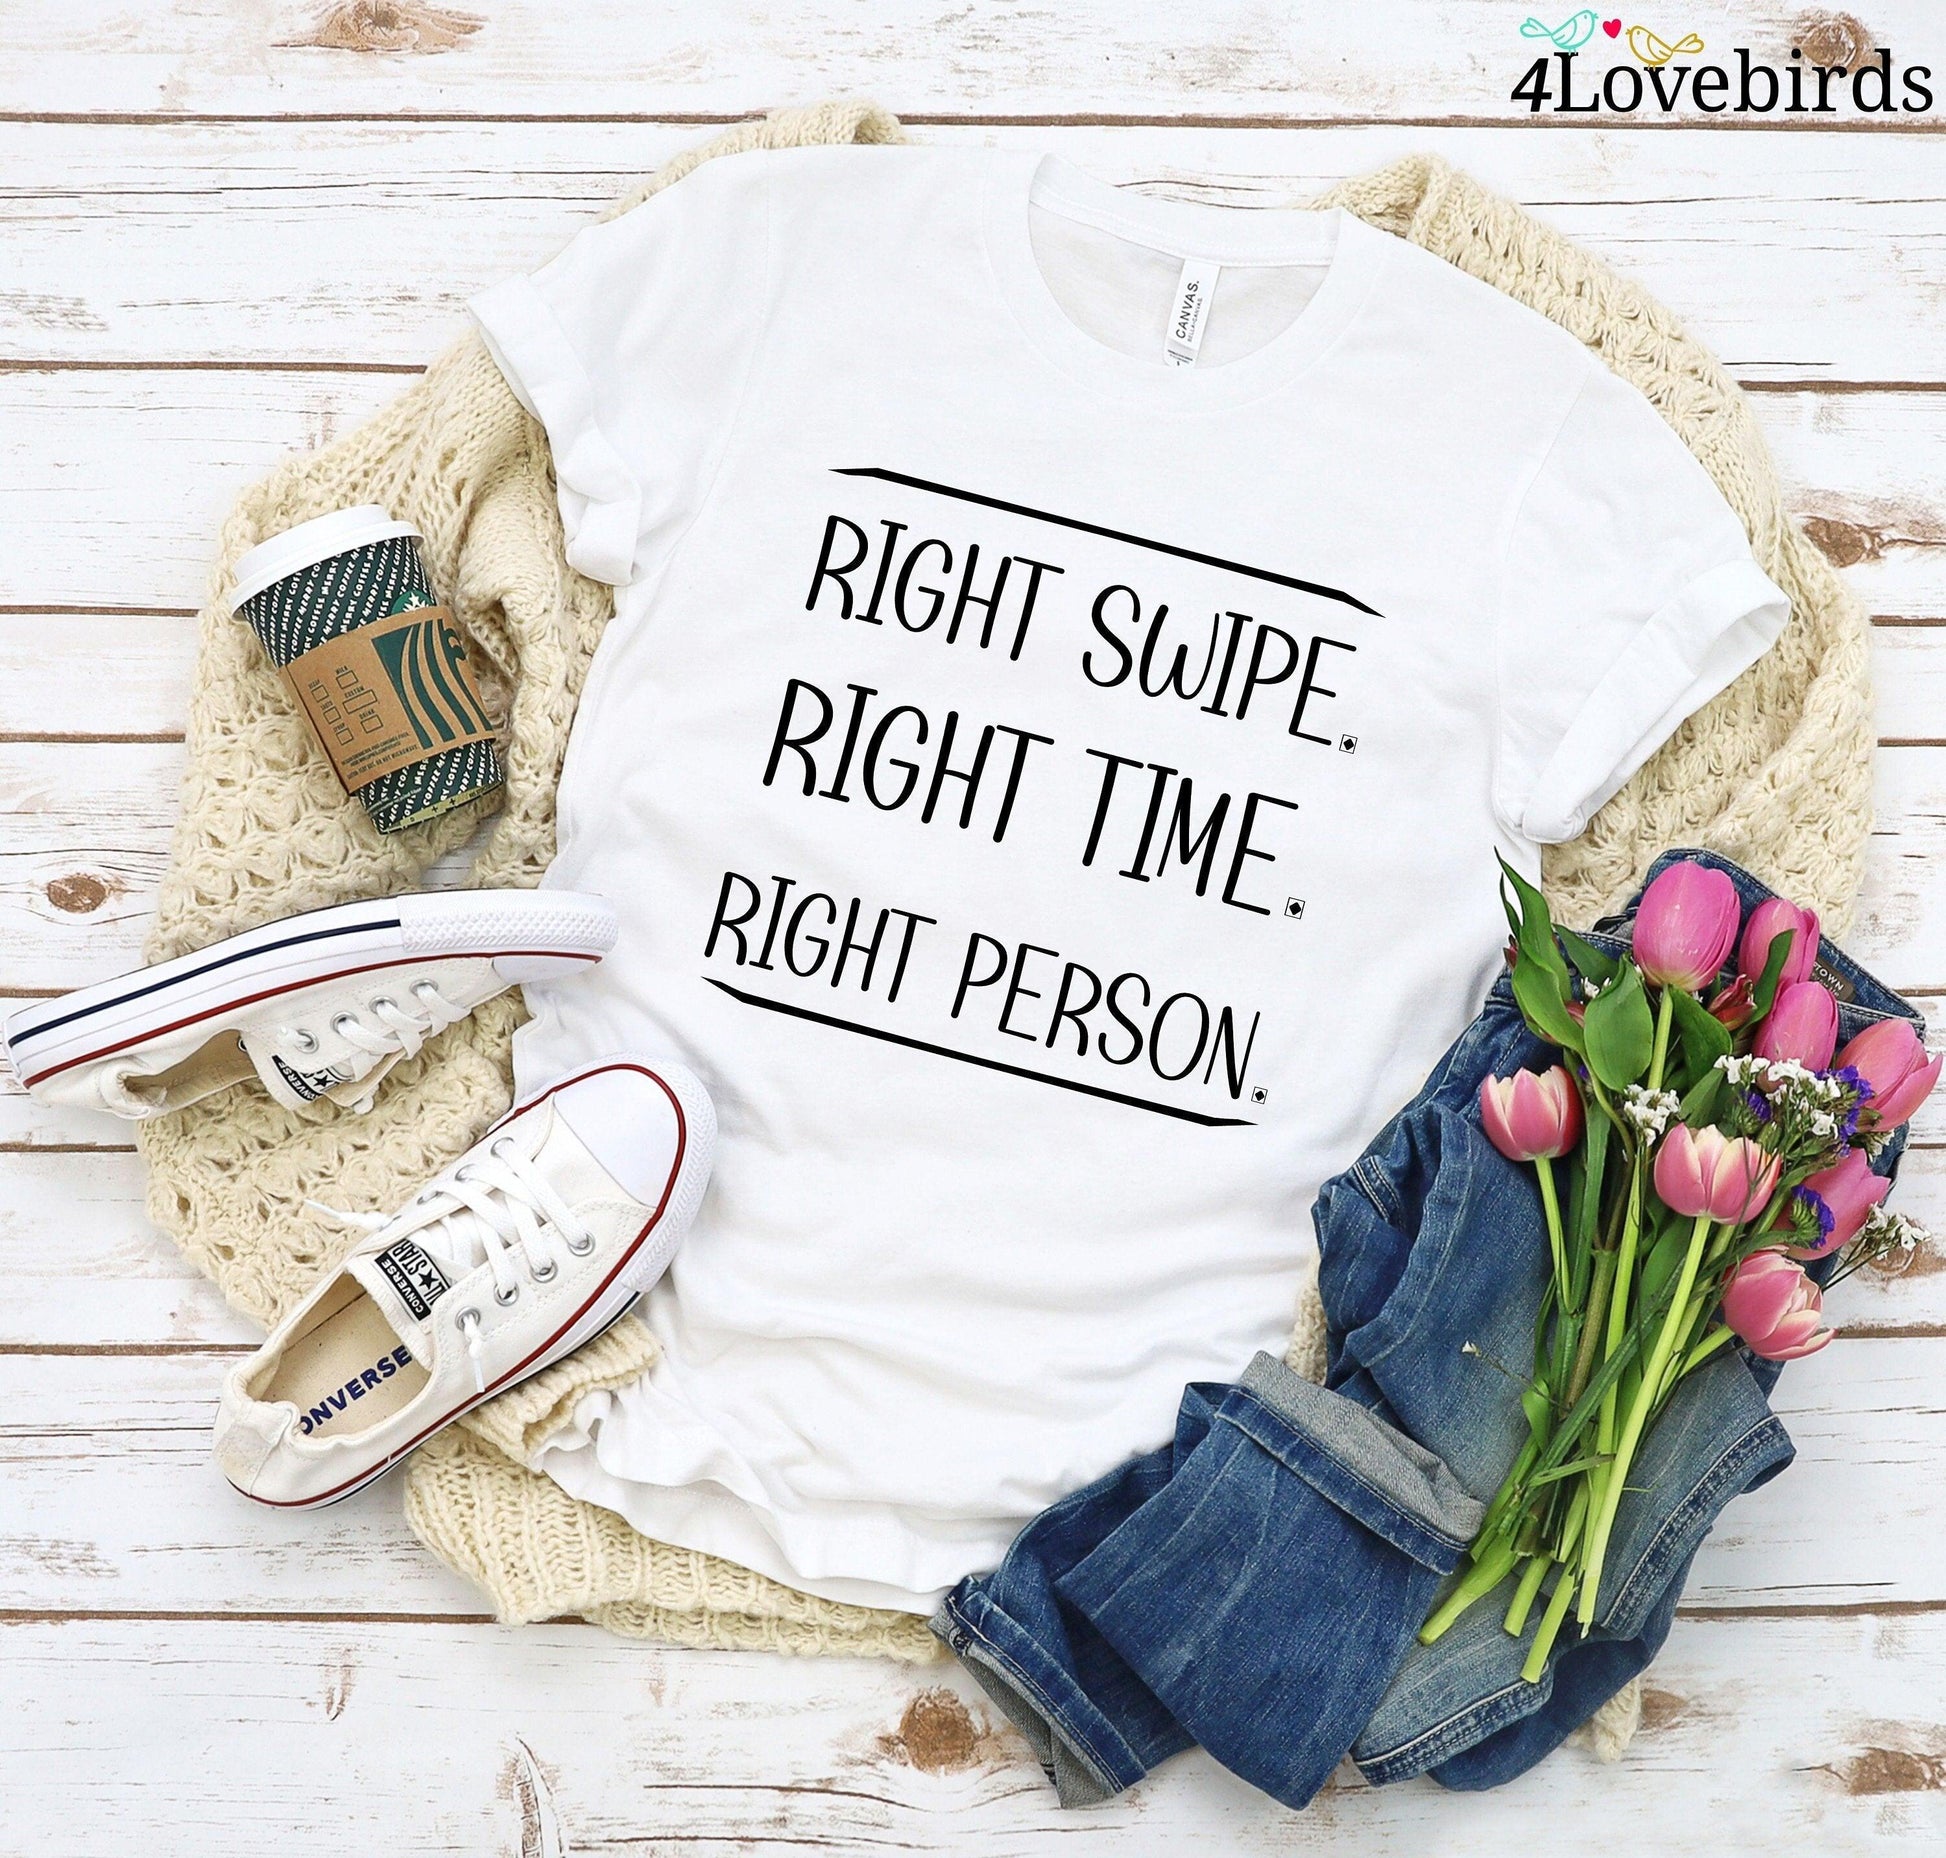 Right Swipe, Right Time | Tinder Couple T-Shirt | Dating App Couple Anniversary Gift Ideas - 4Lovebirds